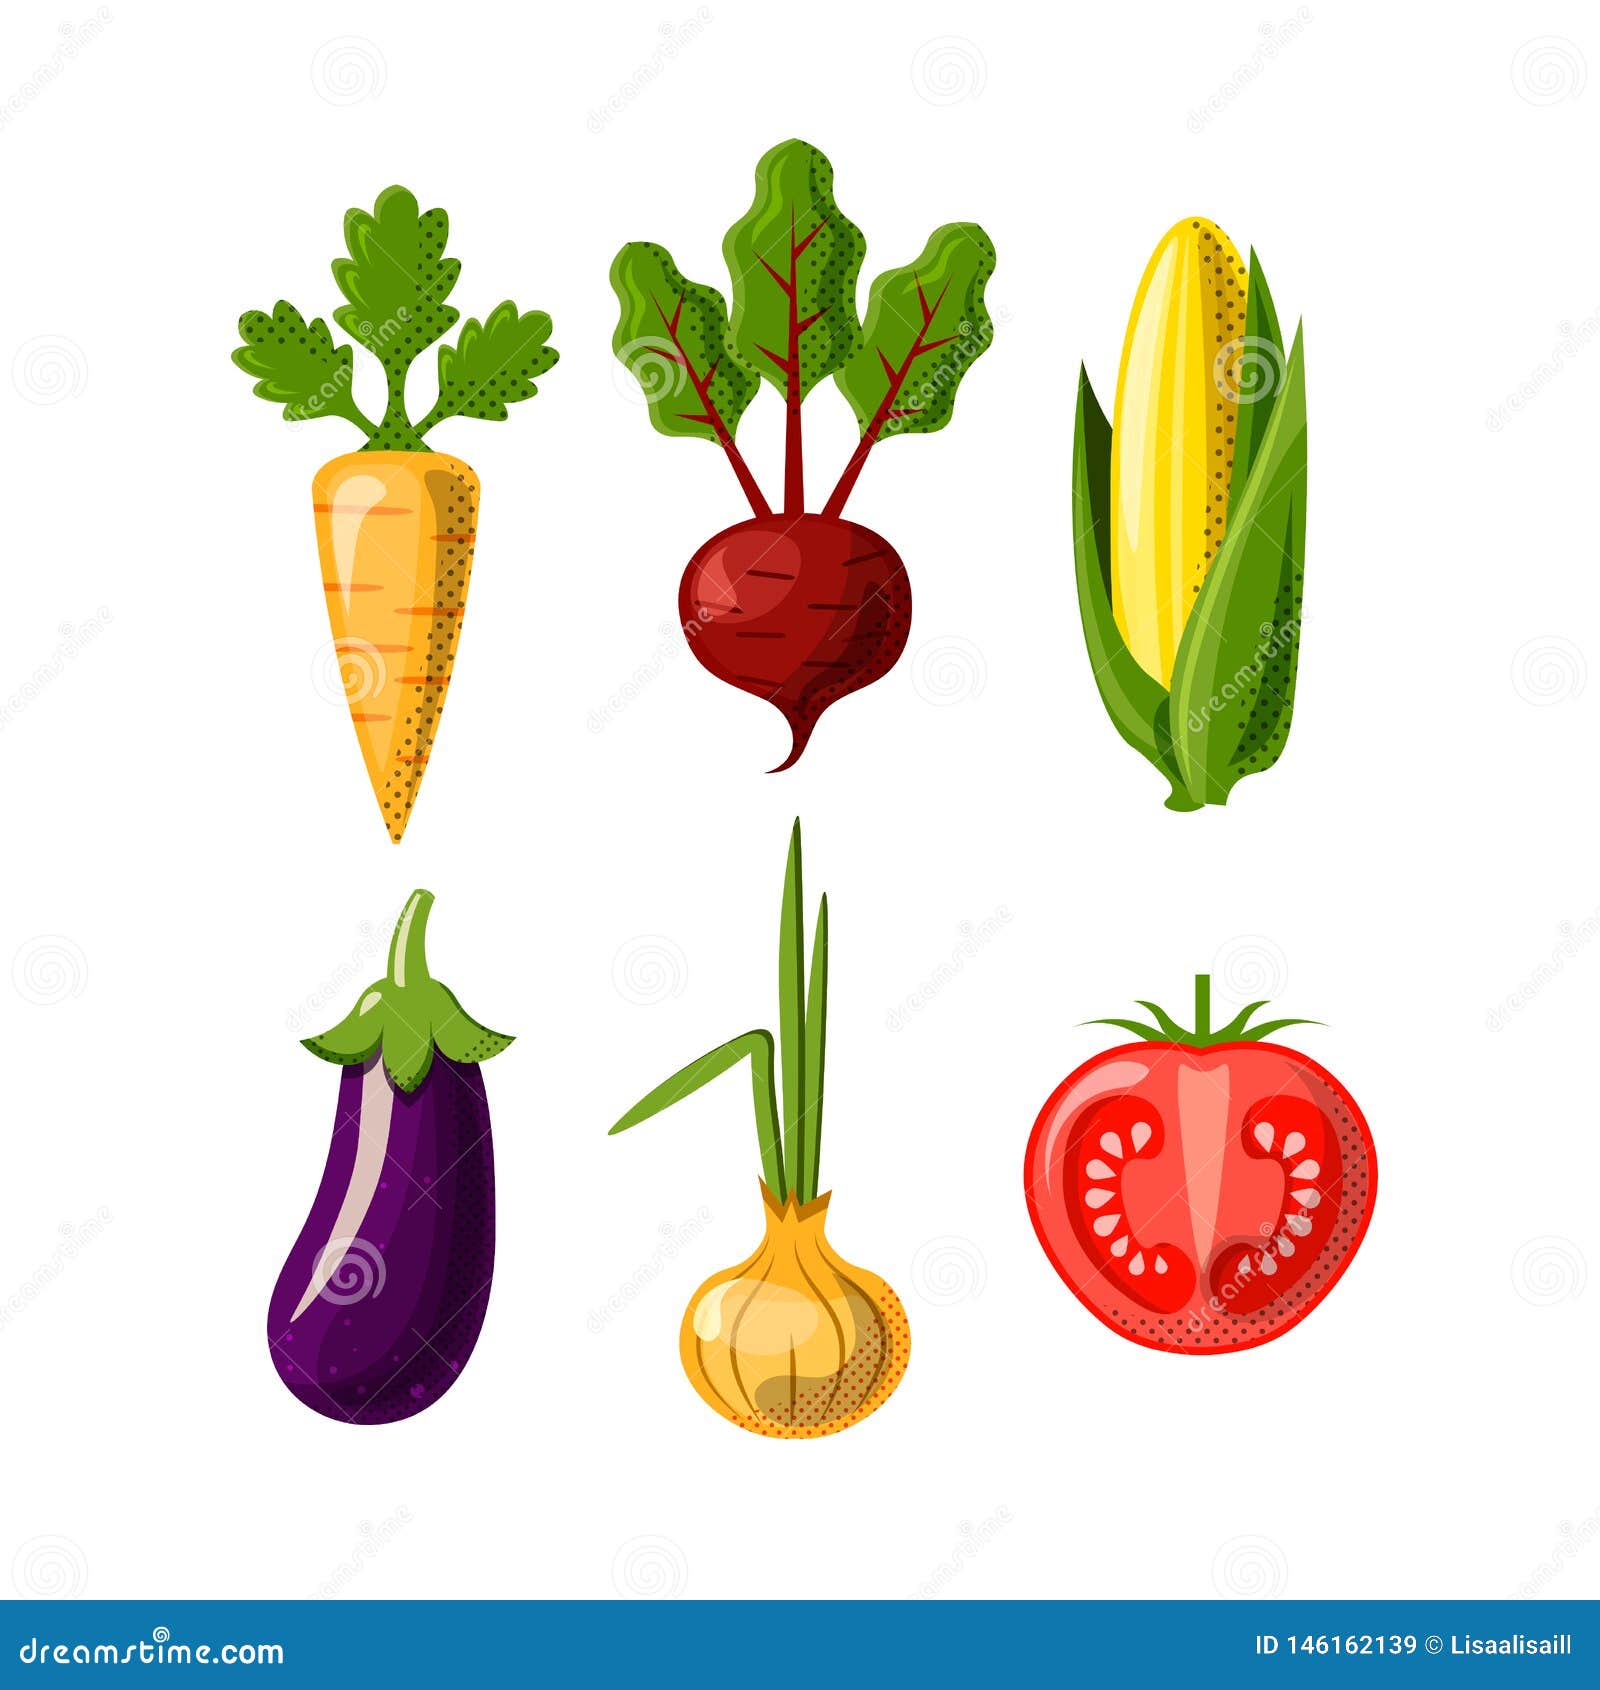 vegetables flat icons  on white background. carrot, beetroot or beet, corn, onion and tomate and eggplant. flat